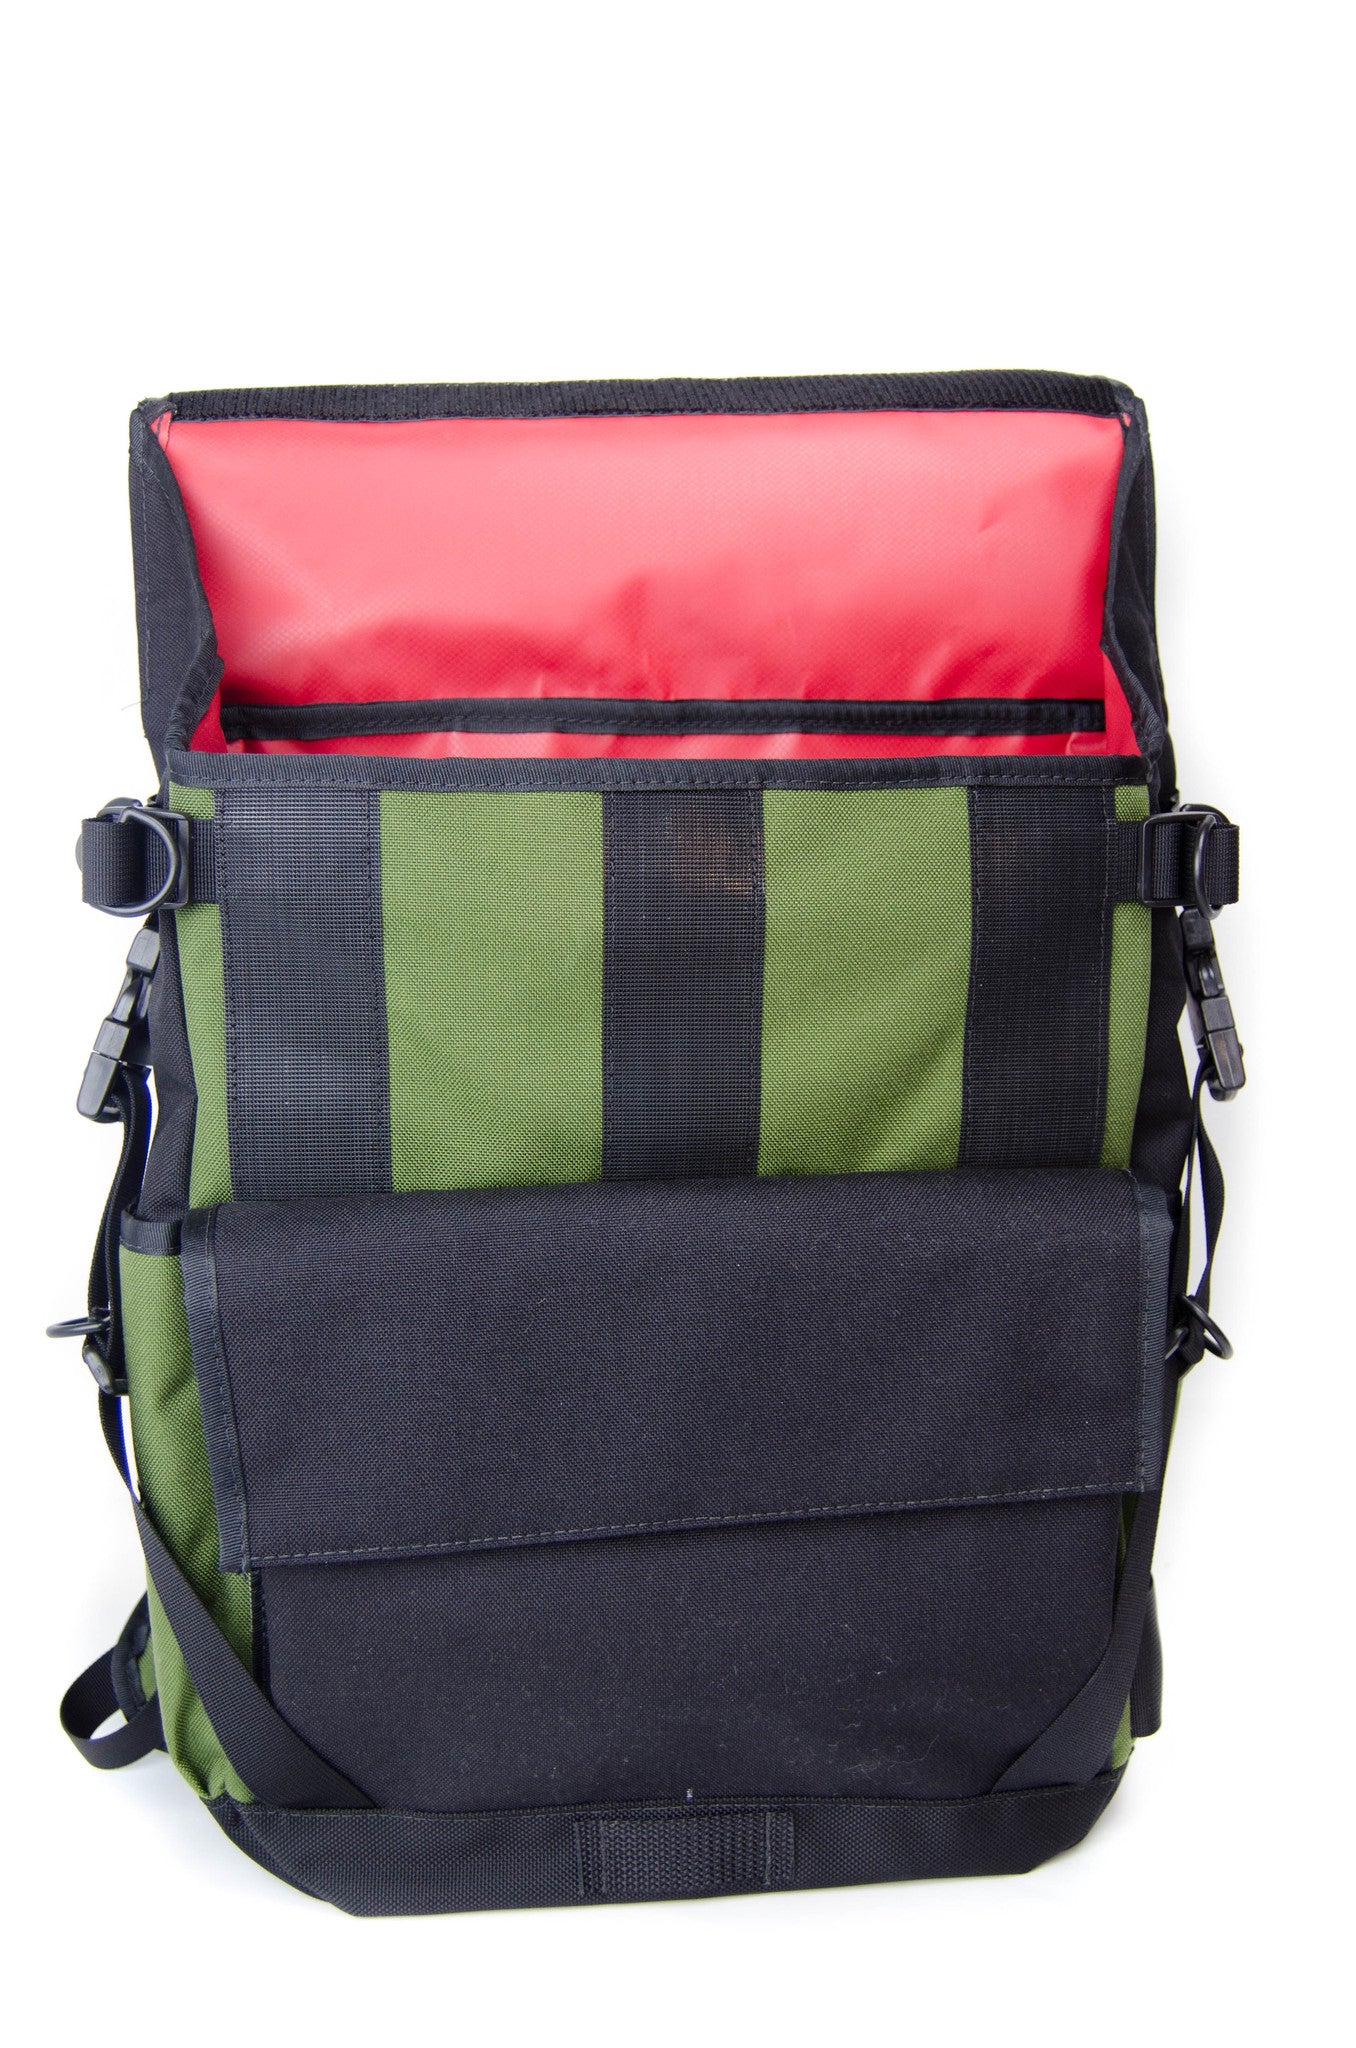 Olive and Black Flap Top Backpack